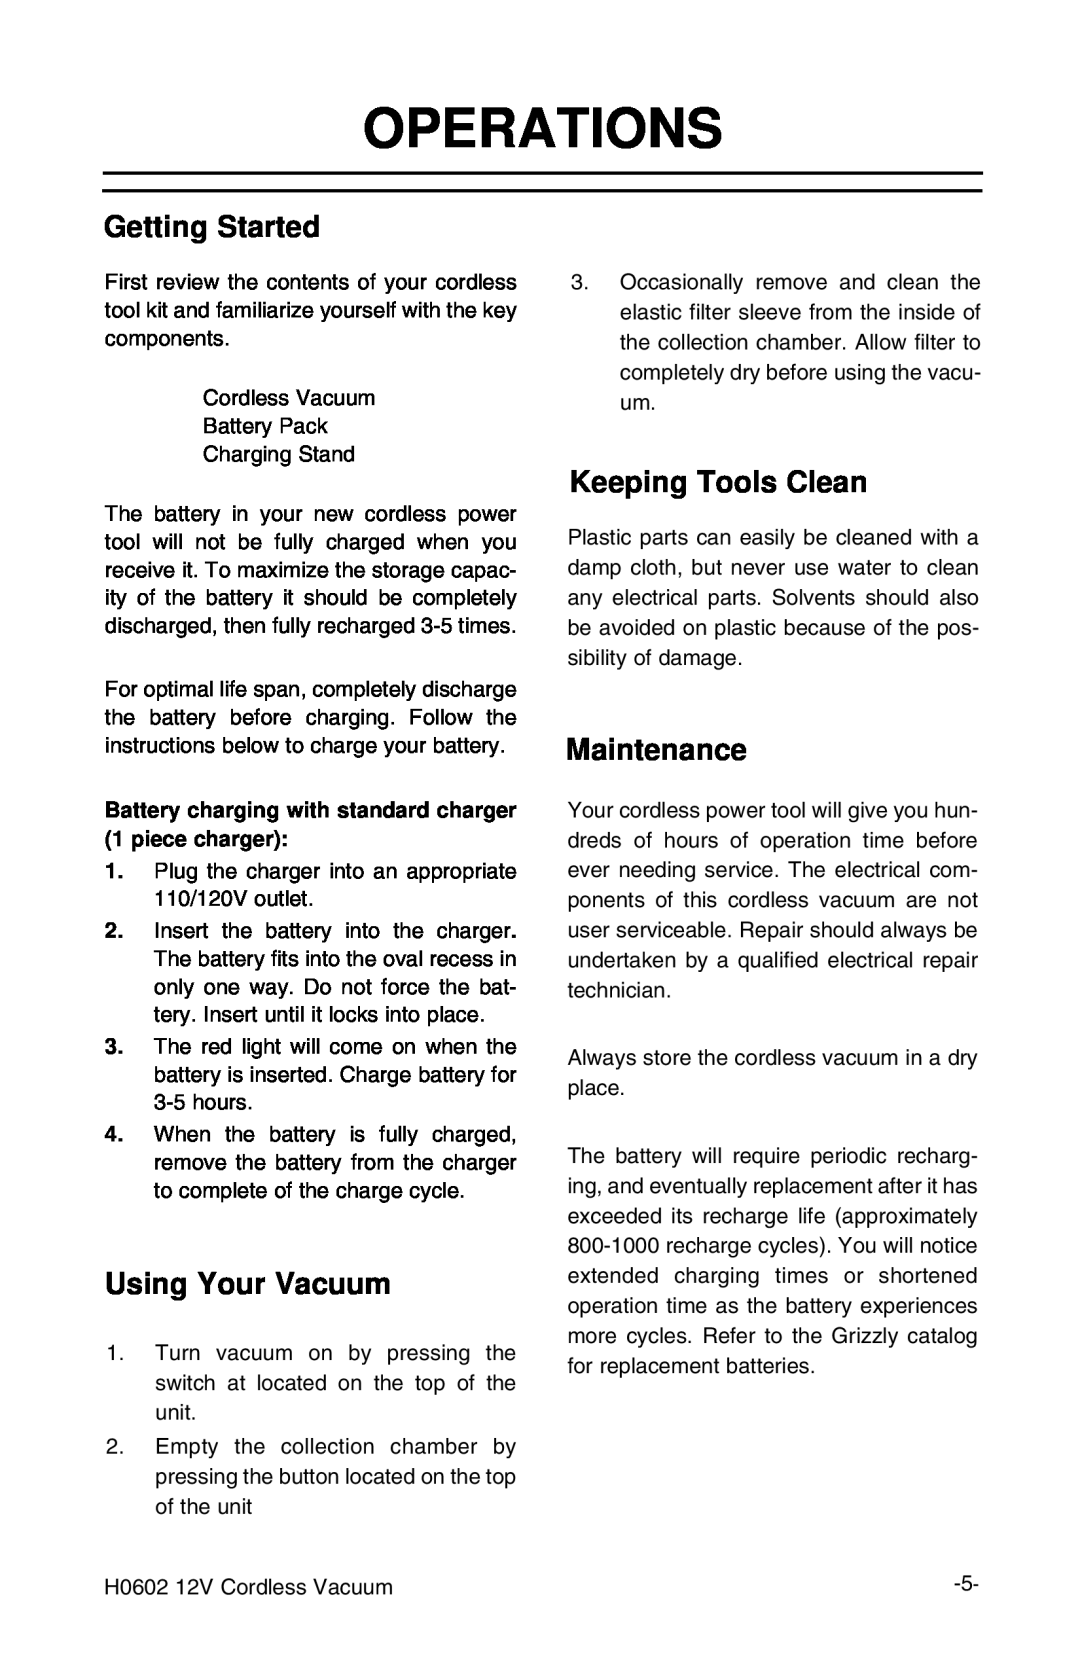 Grizzly H0602 instruction manual Operations, Getting Started, Using Your Vacuum, Keeping Tools Clean, Maintenance 